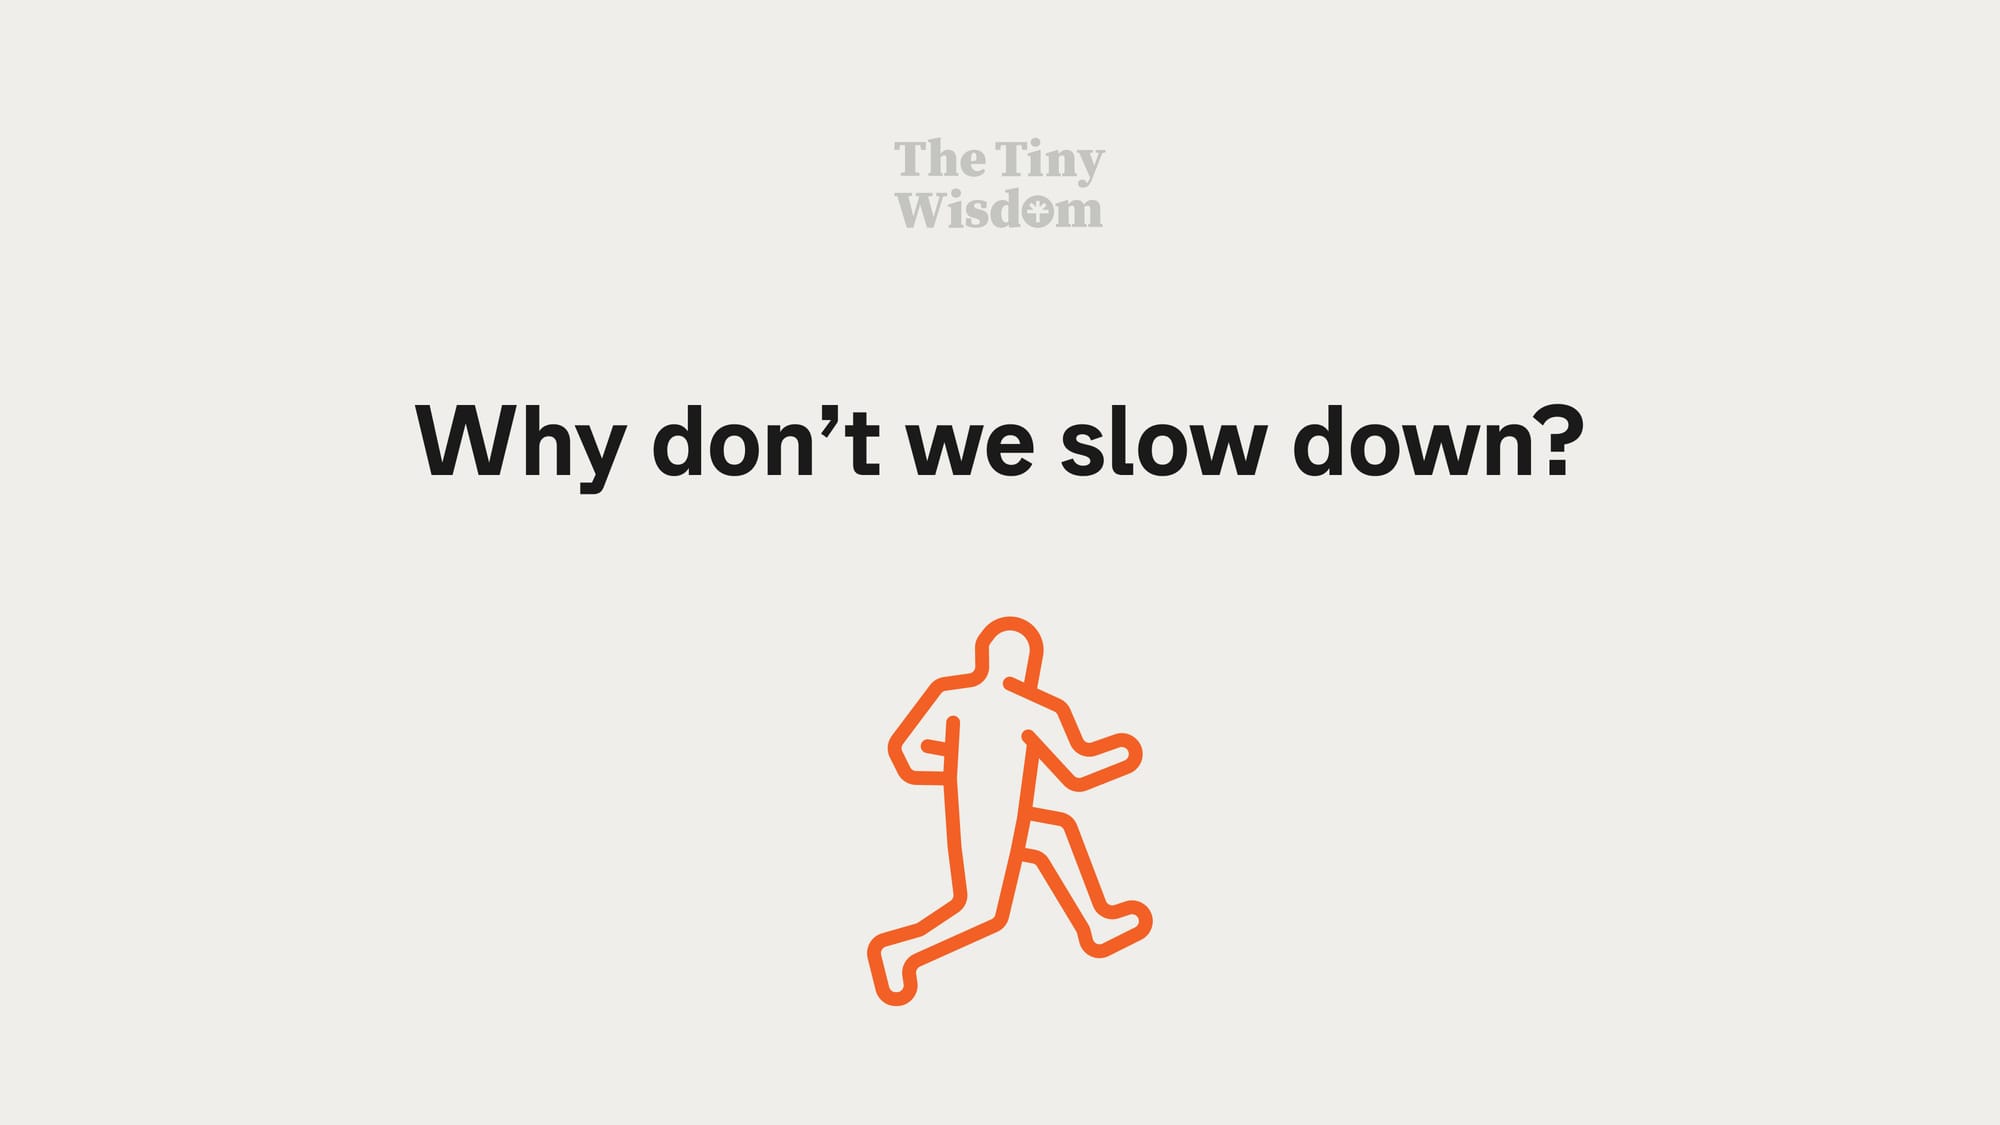 Why don't we slow down?